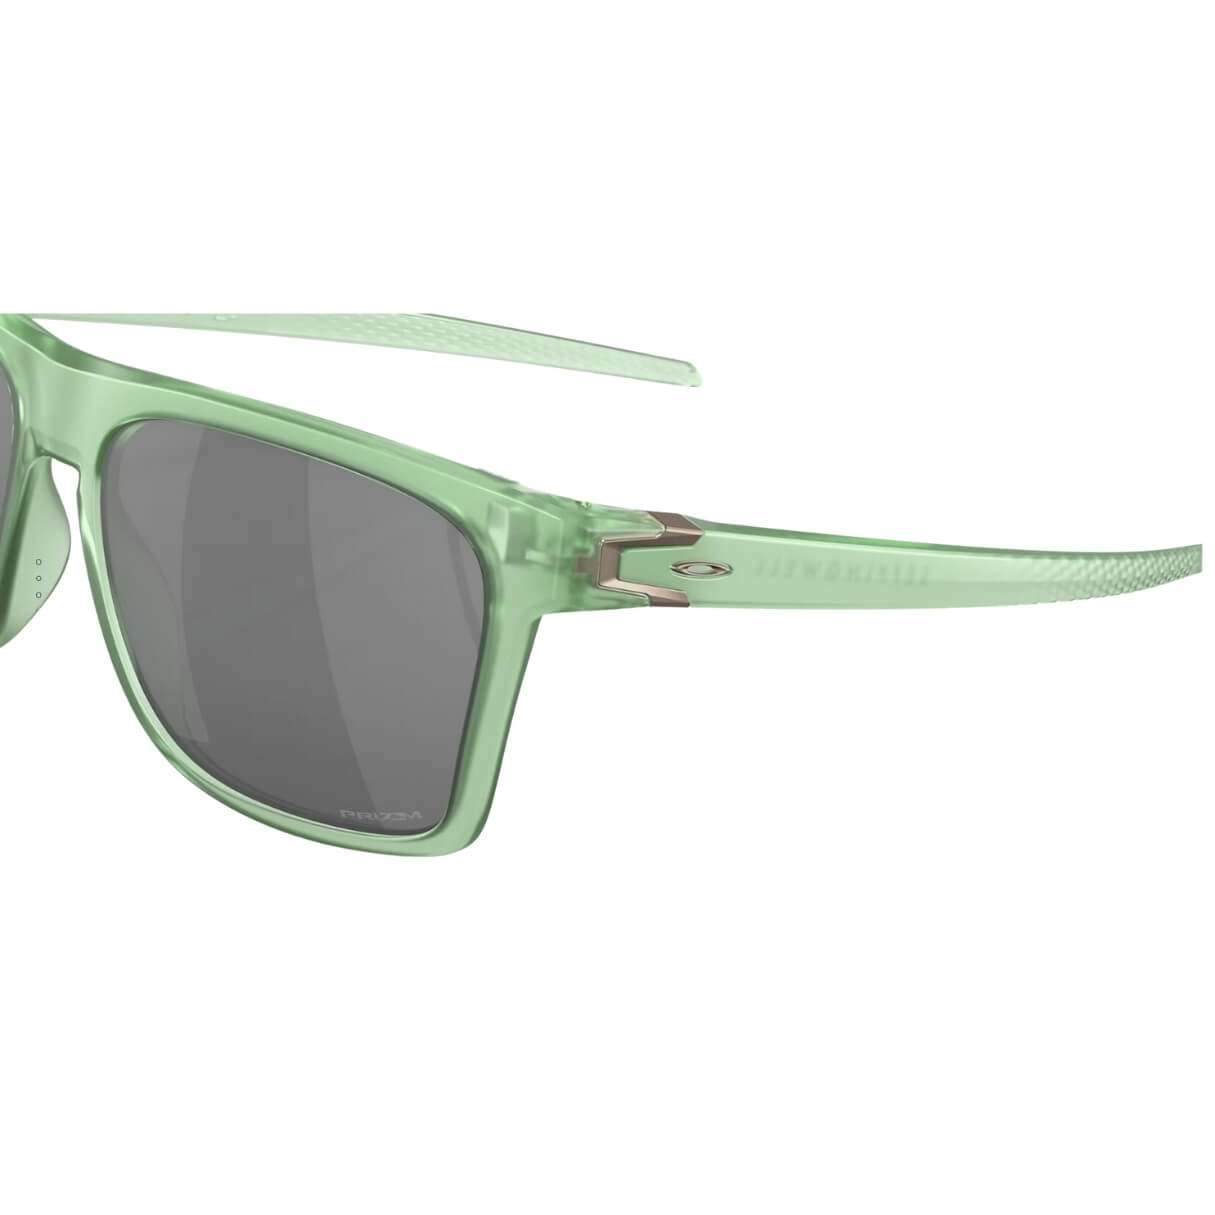 Oakley OO9100 Leffingwell 910017 Sunglasses - Matte Jade with Prizm Lens Side View